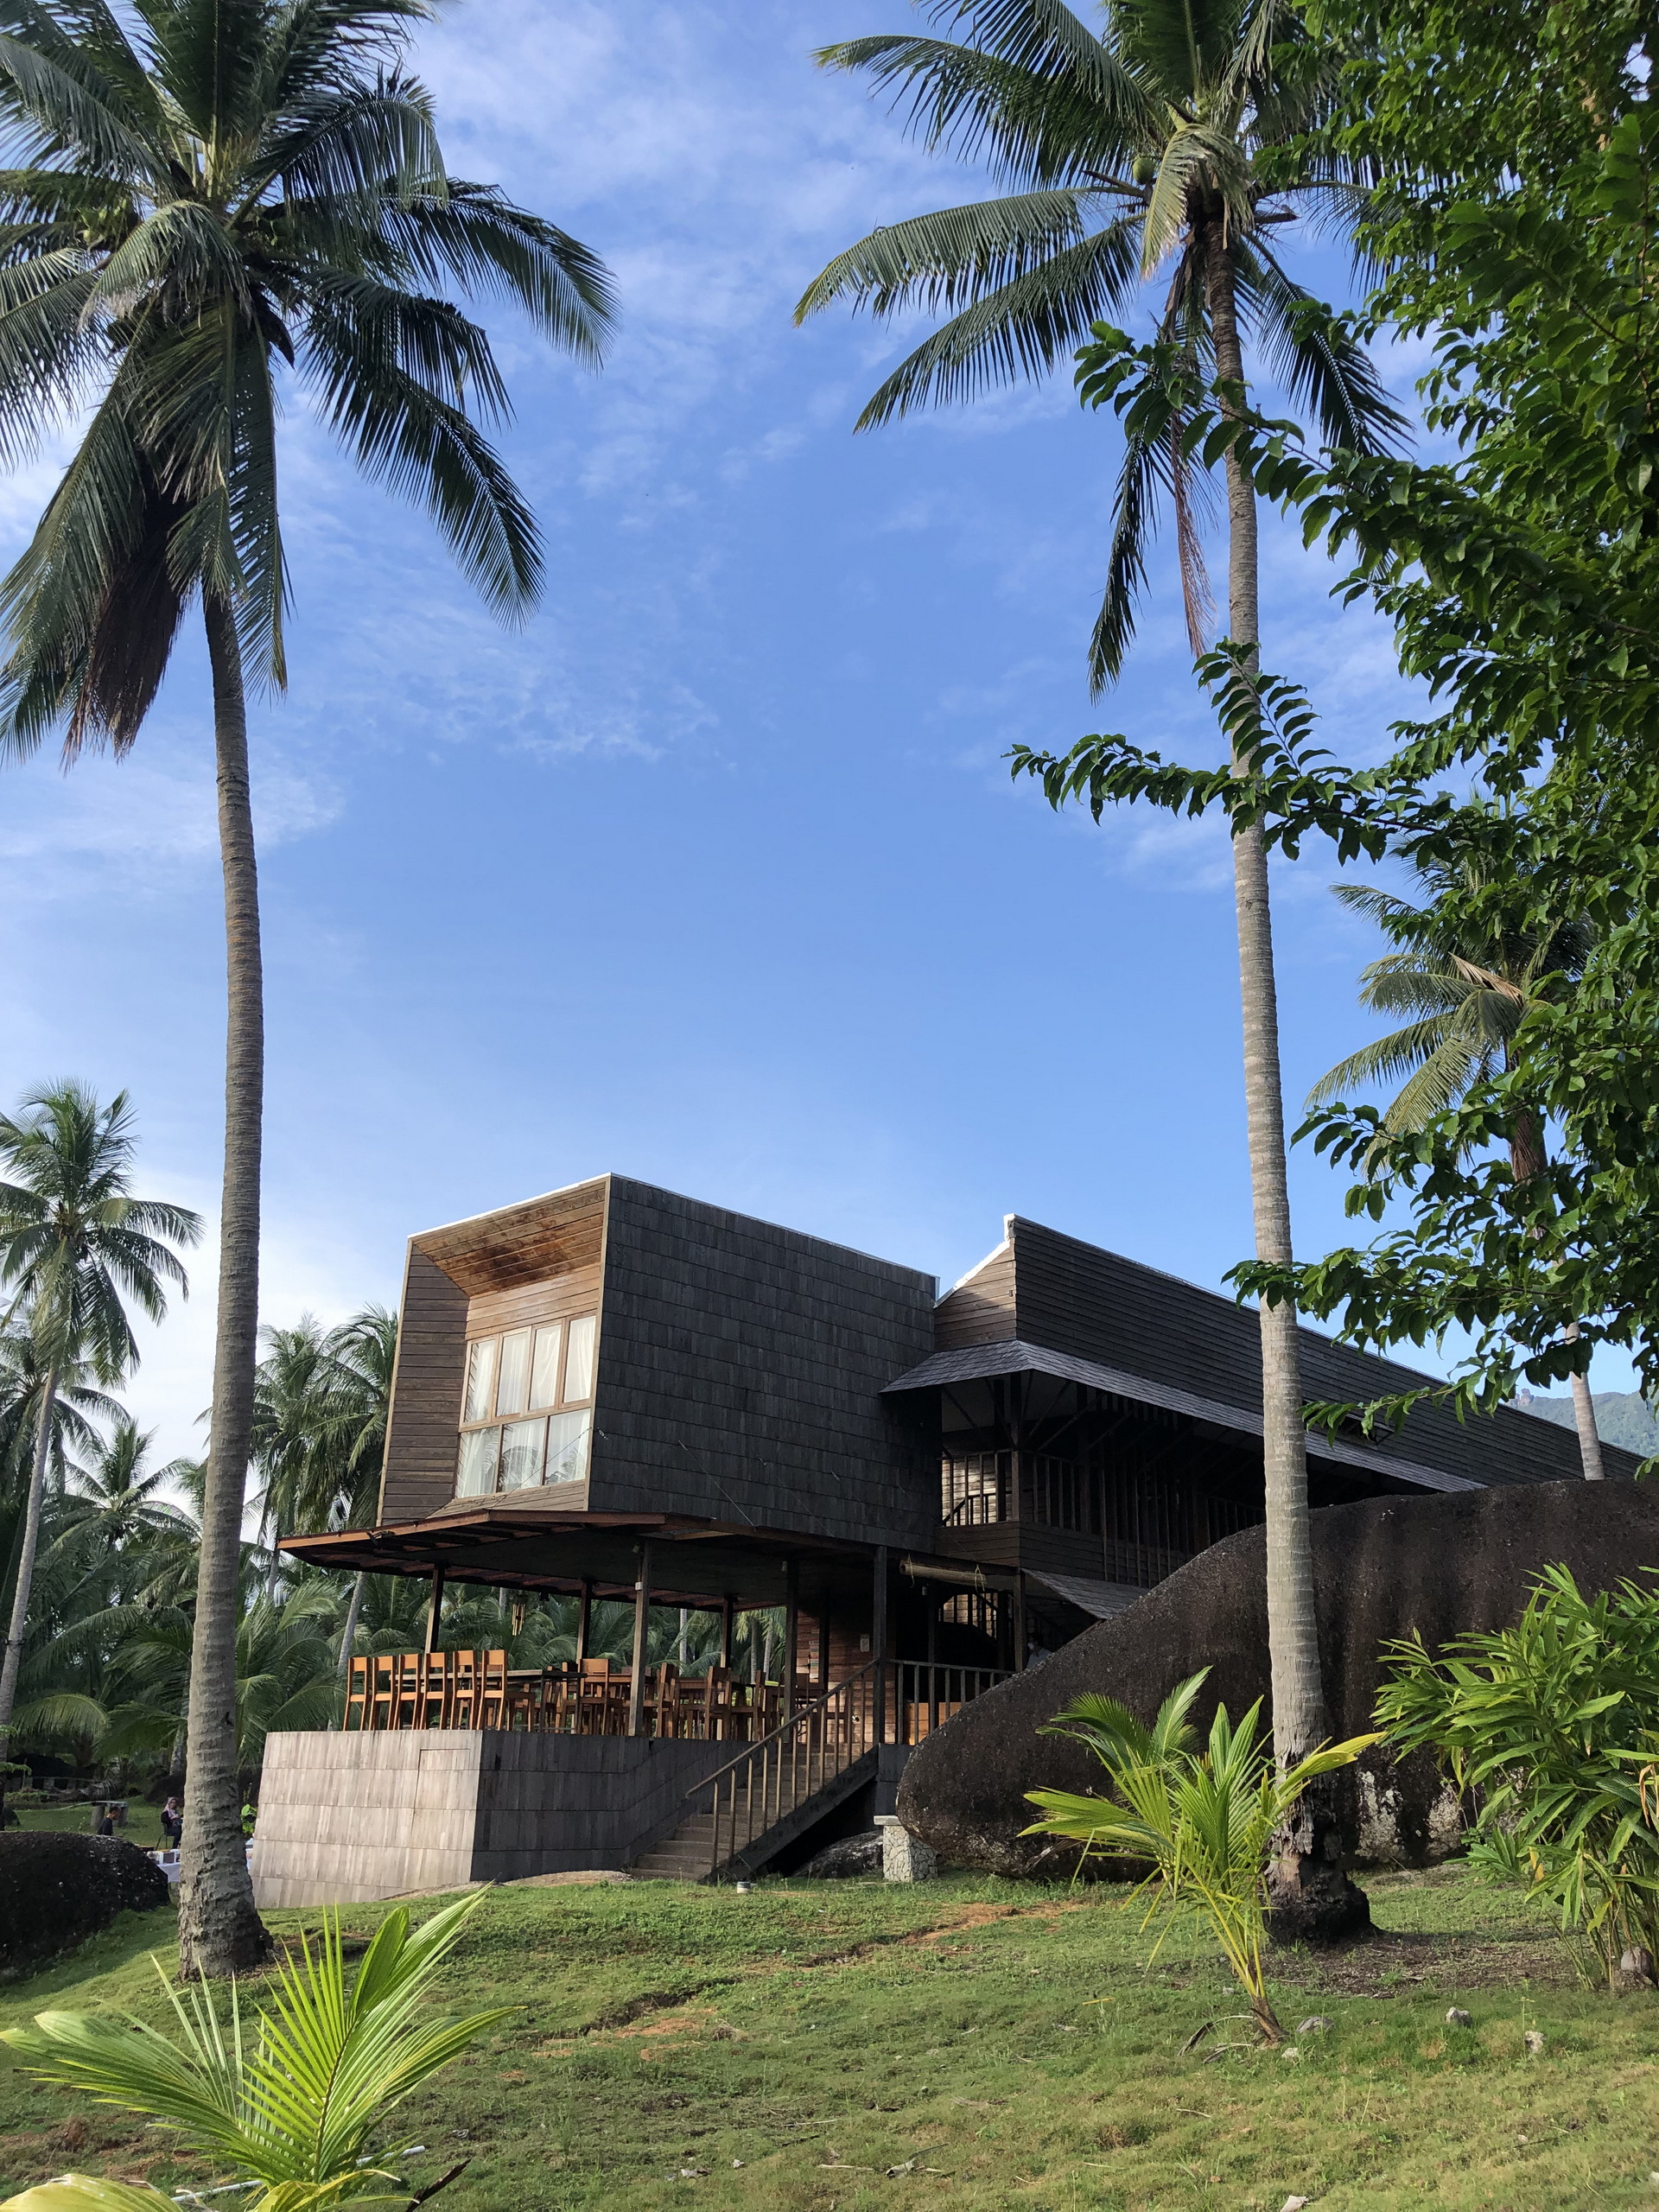 <p>The site is characterised by rock formations and palm groves, and the main block of the hotel is raised on stilts to protect the environment, while the other structures are carefully integrated within it.</p>